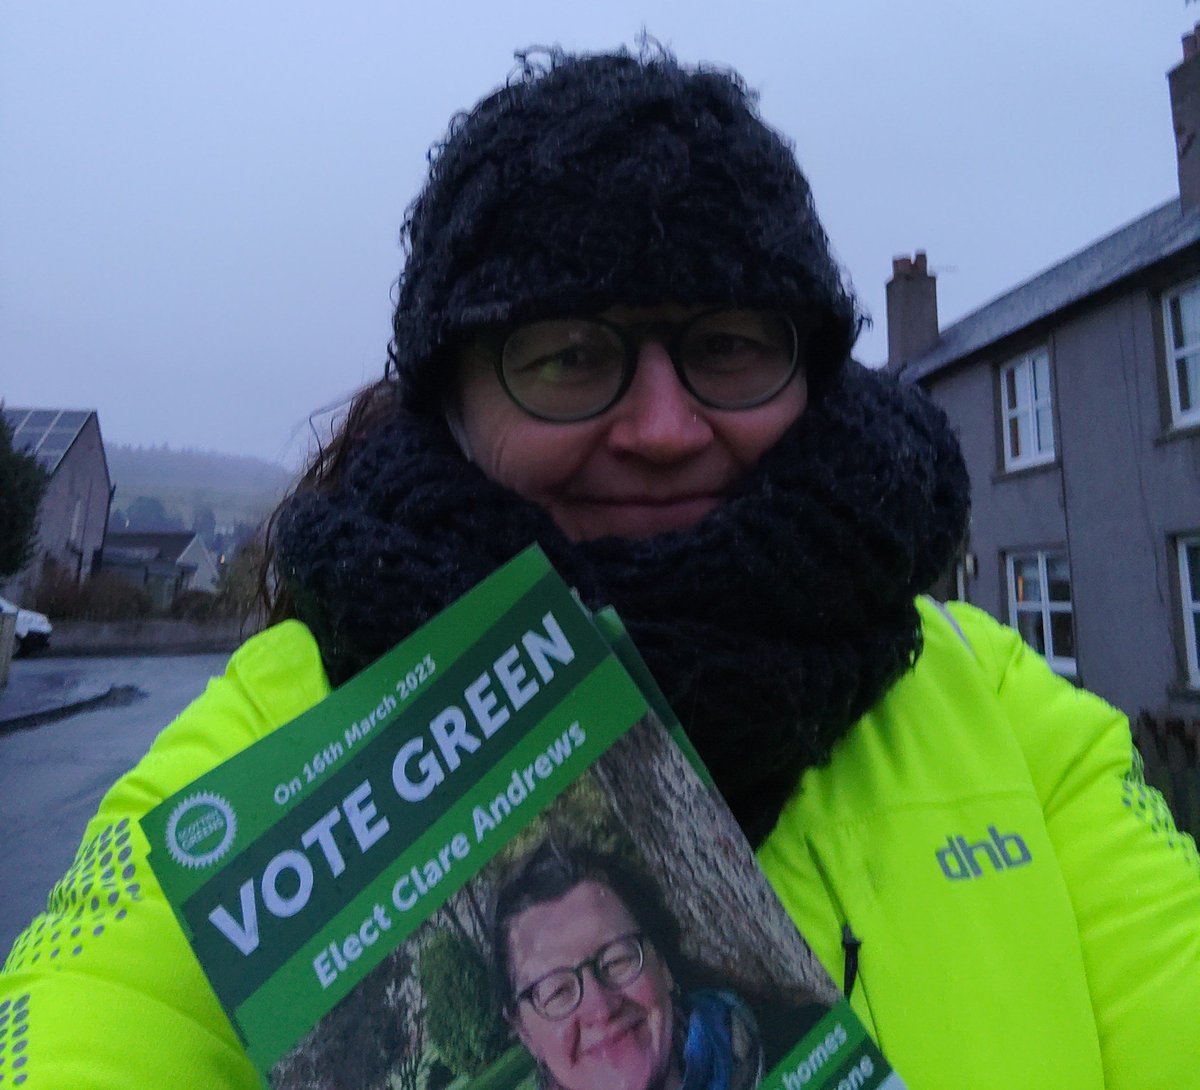 Solidarity with all striking public sector workers today ✊ Despite the dreich, I used my strike afternoon to share my @scottishgreens vision for #warmerhomes #saferstreets & real #ClimateAction ahead of tomorrow's by-election in #Dunblane & #BridgeofAllan ☔ #VoteGreen